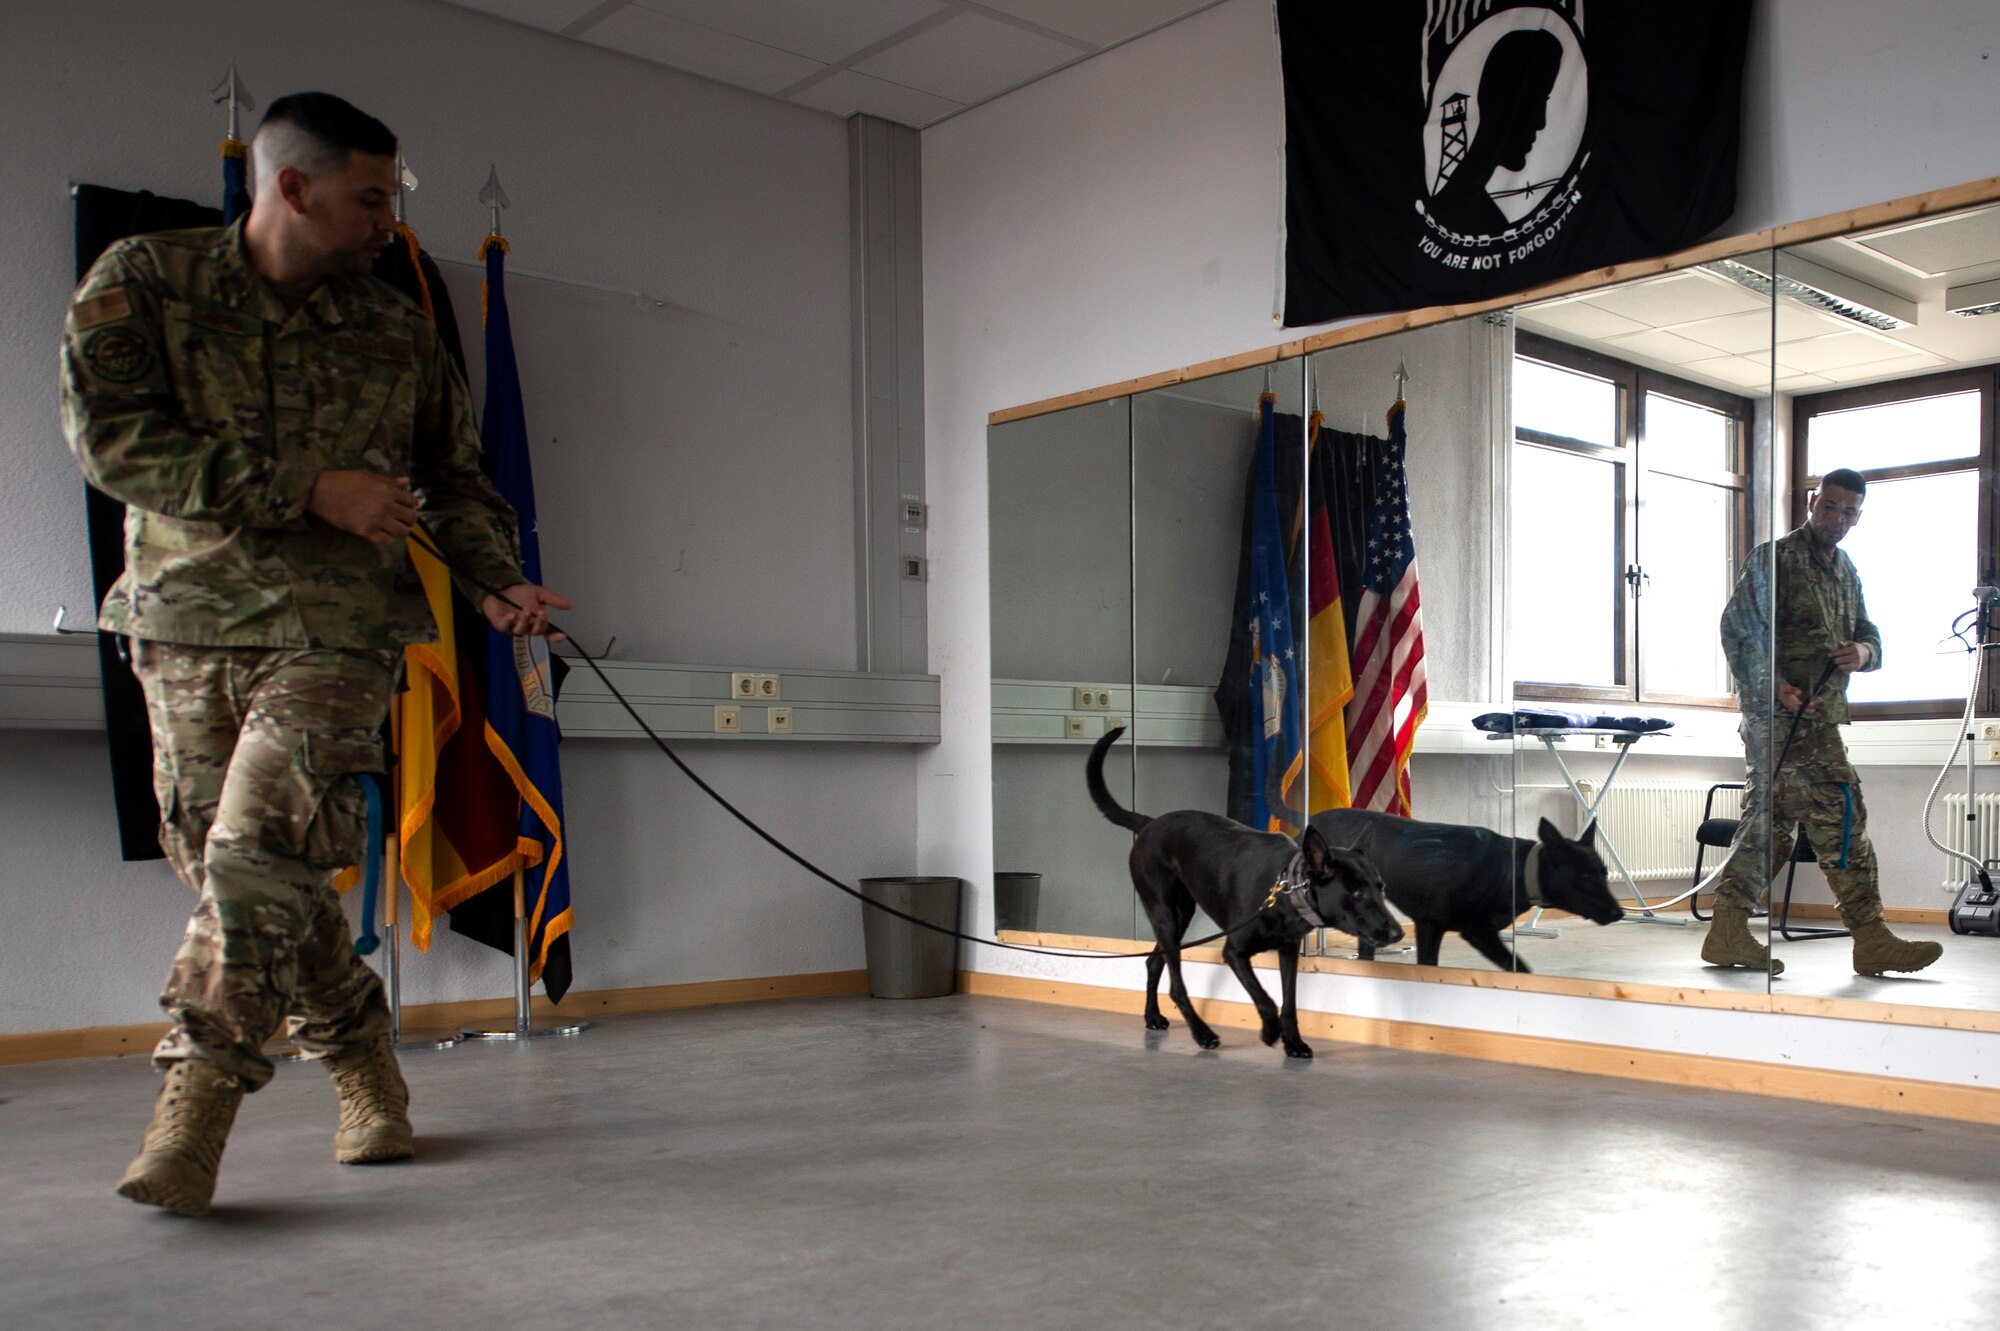 U.S. Air Force Senior Airman Erik Barrera, 52nd Security Forces Squadron military working dog handler, and Ccatilina, an MWD, conduct detection training at Spangdahlem Air Base, Germany, Aug. 1, 2019. Handlers and MWDs learn to communicate with each other to understand when drugs or explosives are present. (U.S. Air Force photo by Airman 1st Class Valerie Seelye)